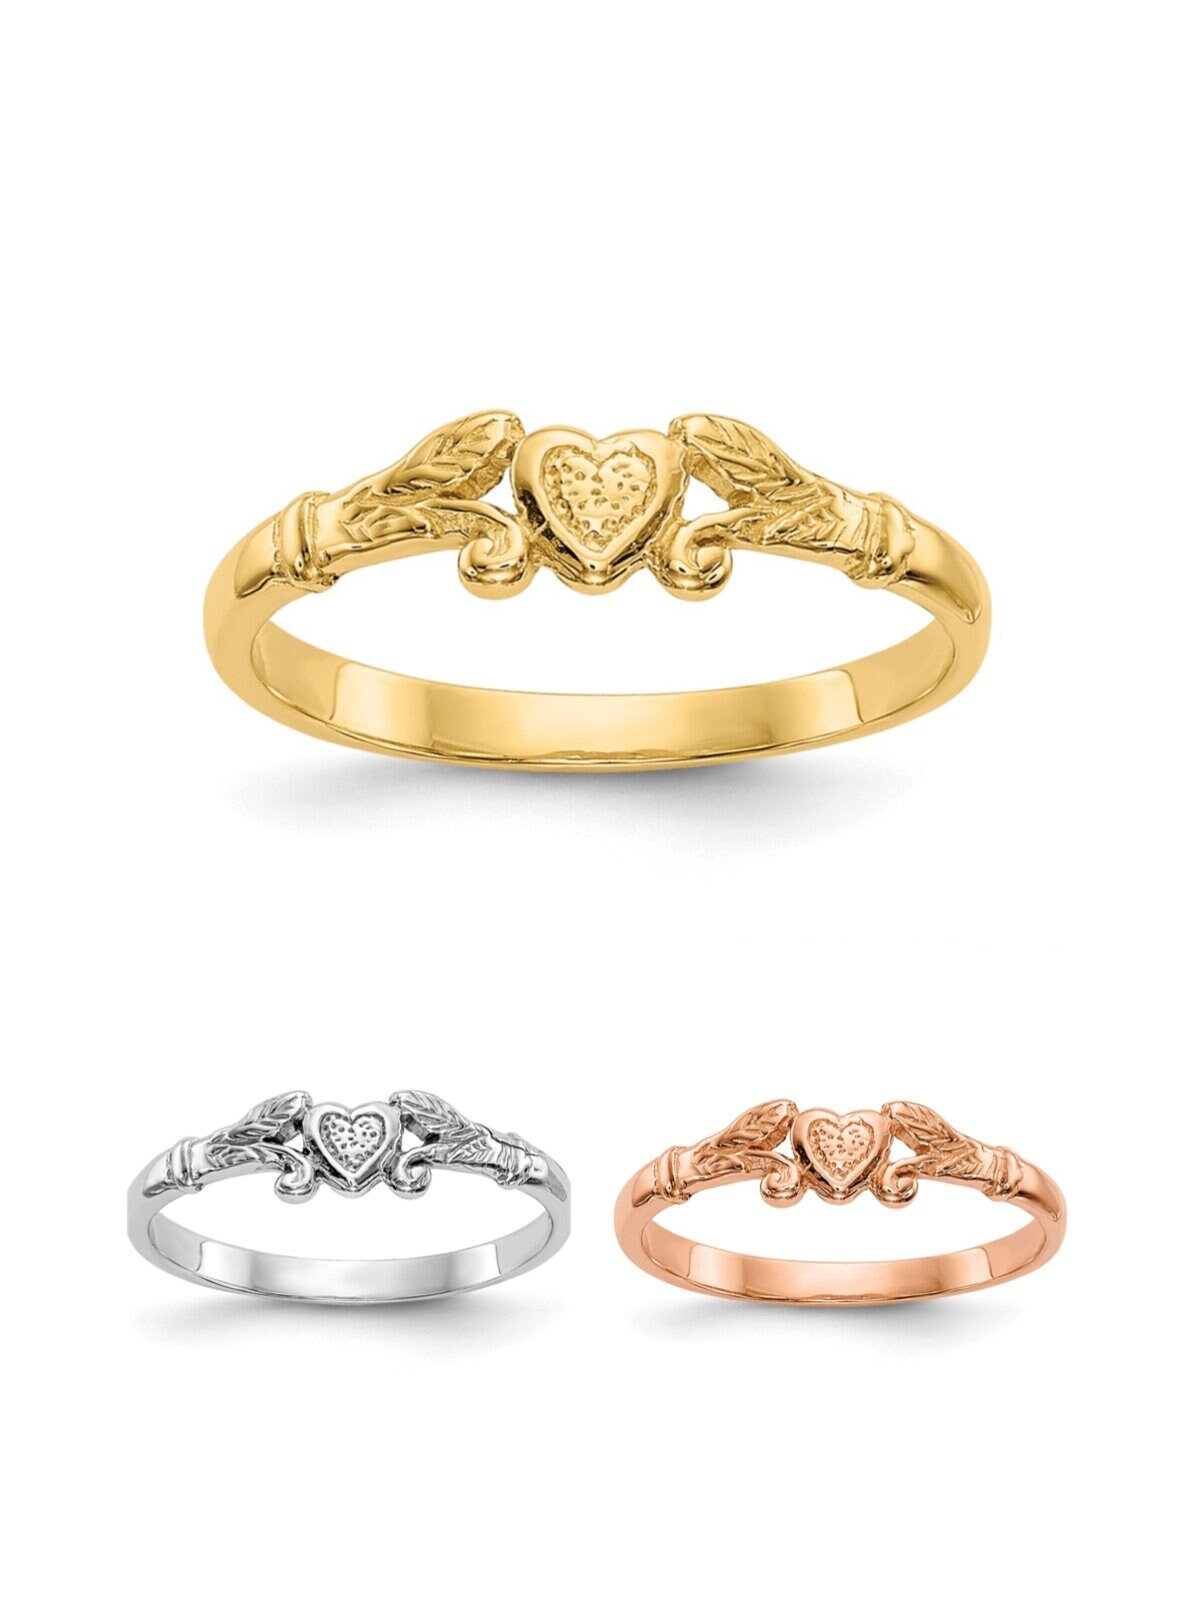 14k Yellow 14k White Gold Baby Heart Ring / Band Size 1-3 Baby to Children Size 14k Rose Gold 1mm Band Gift Box Included